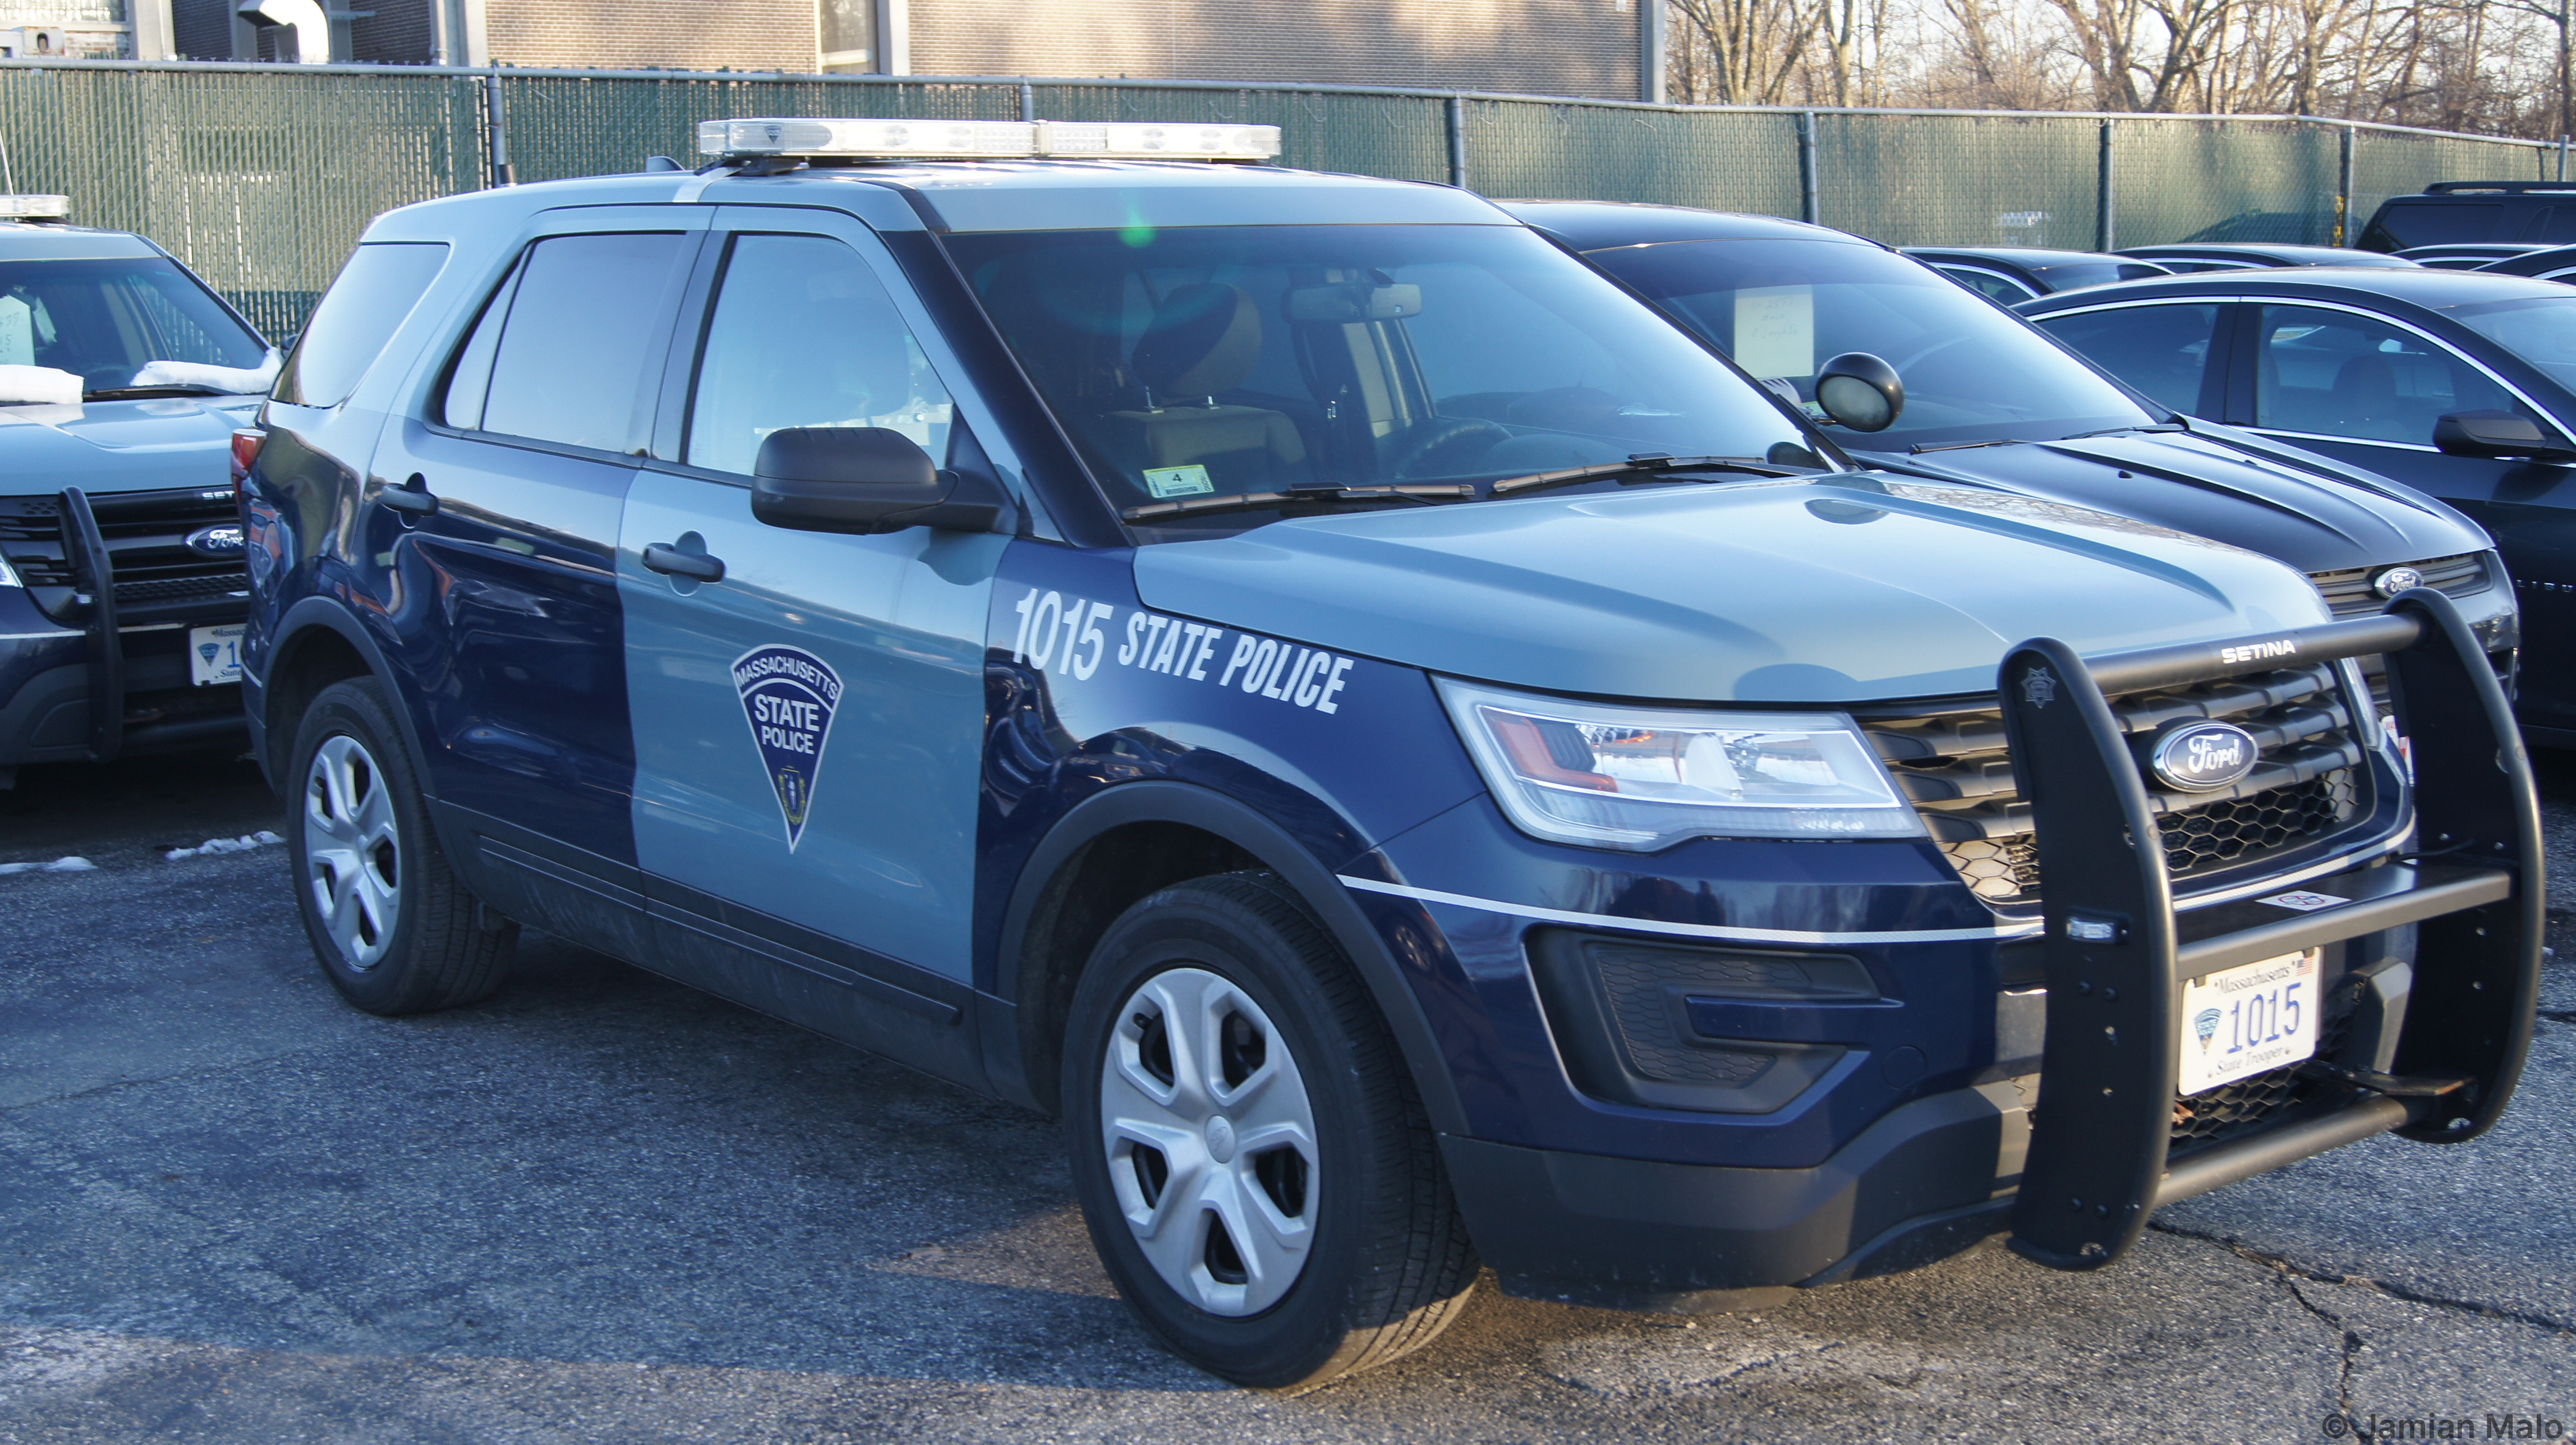 A photo  of Massachusetts State Police
            Cruiser 1015, a 2016 Ford Police Interceptor Utility             taken by Jamian Malo